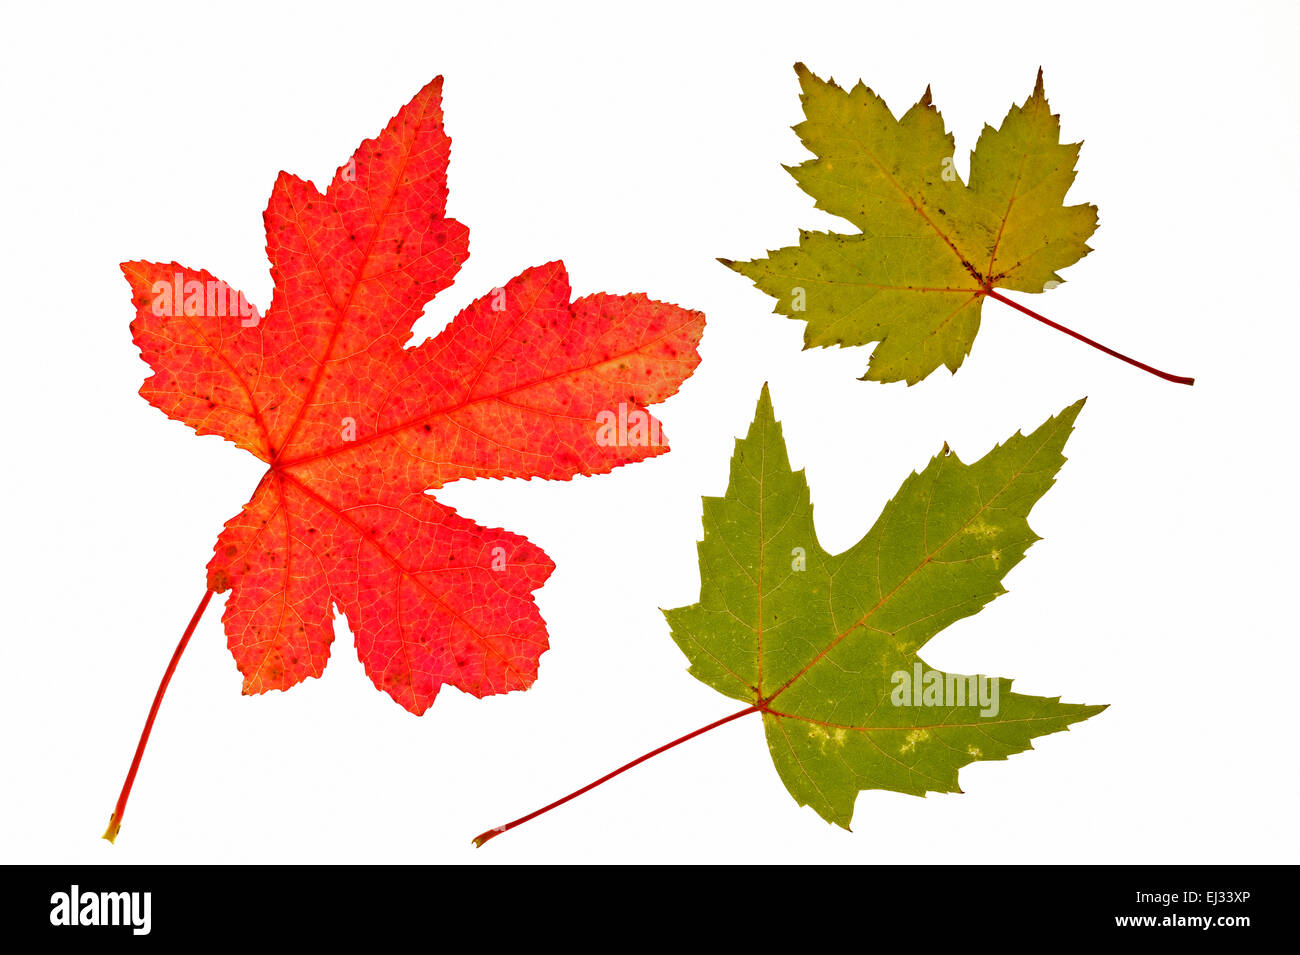 Silver maple / creek maple / silverleaf maple (Acer saccharinum) autumn leaves, native to North America against white background Stock Photo